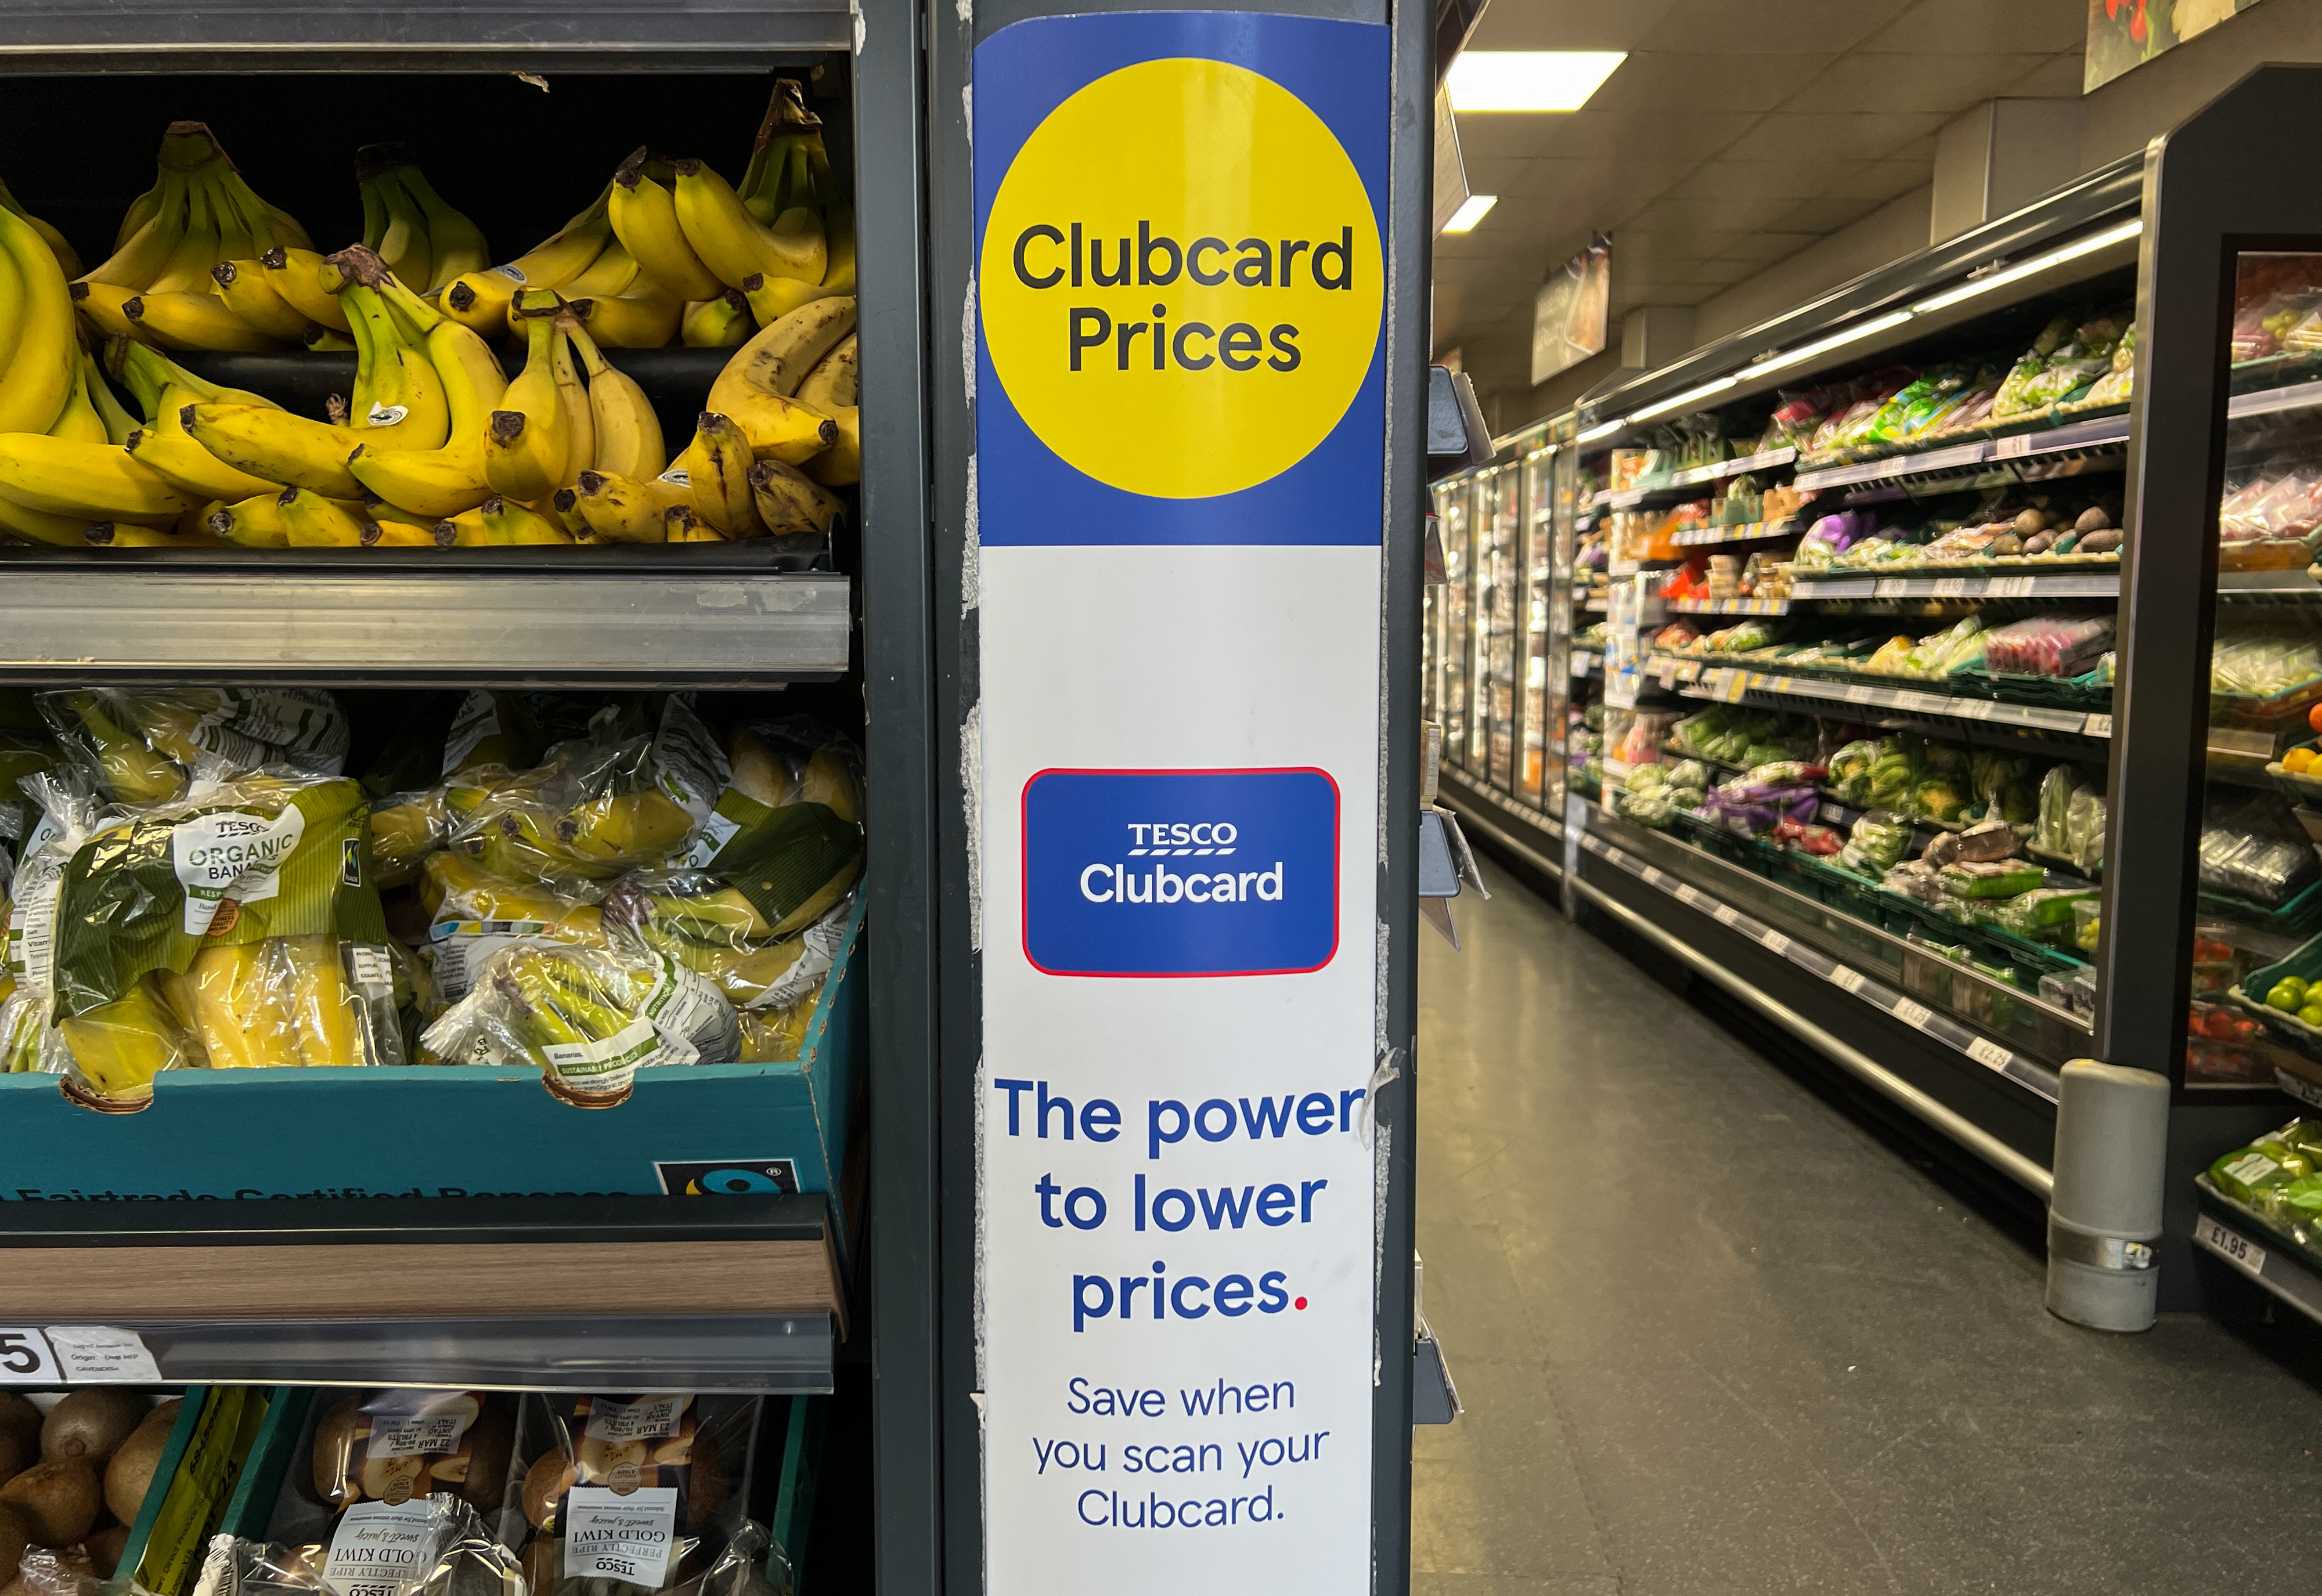 To snap up the deal you'll need your Tesco Clubcard